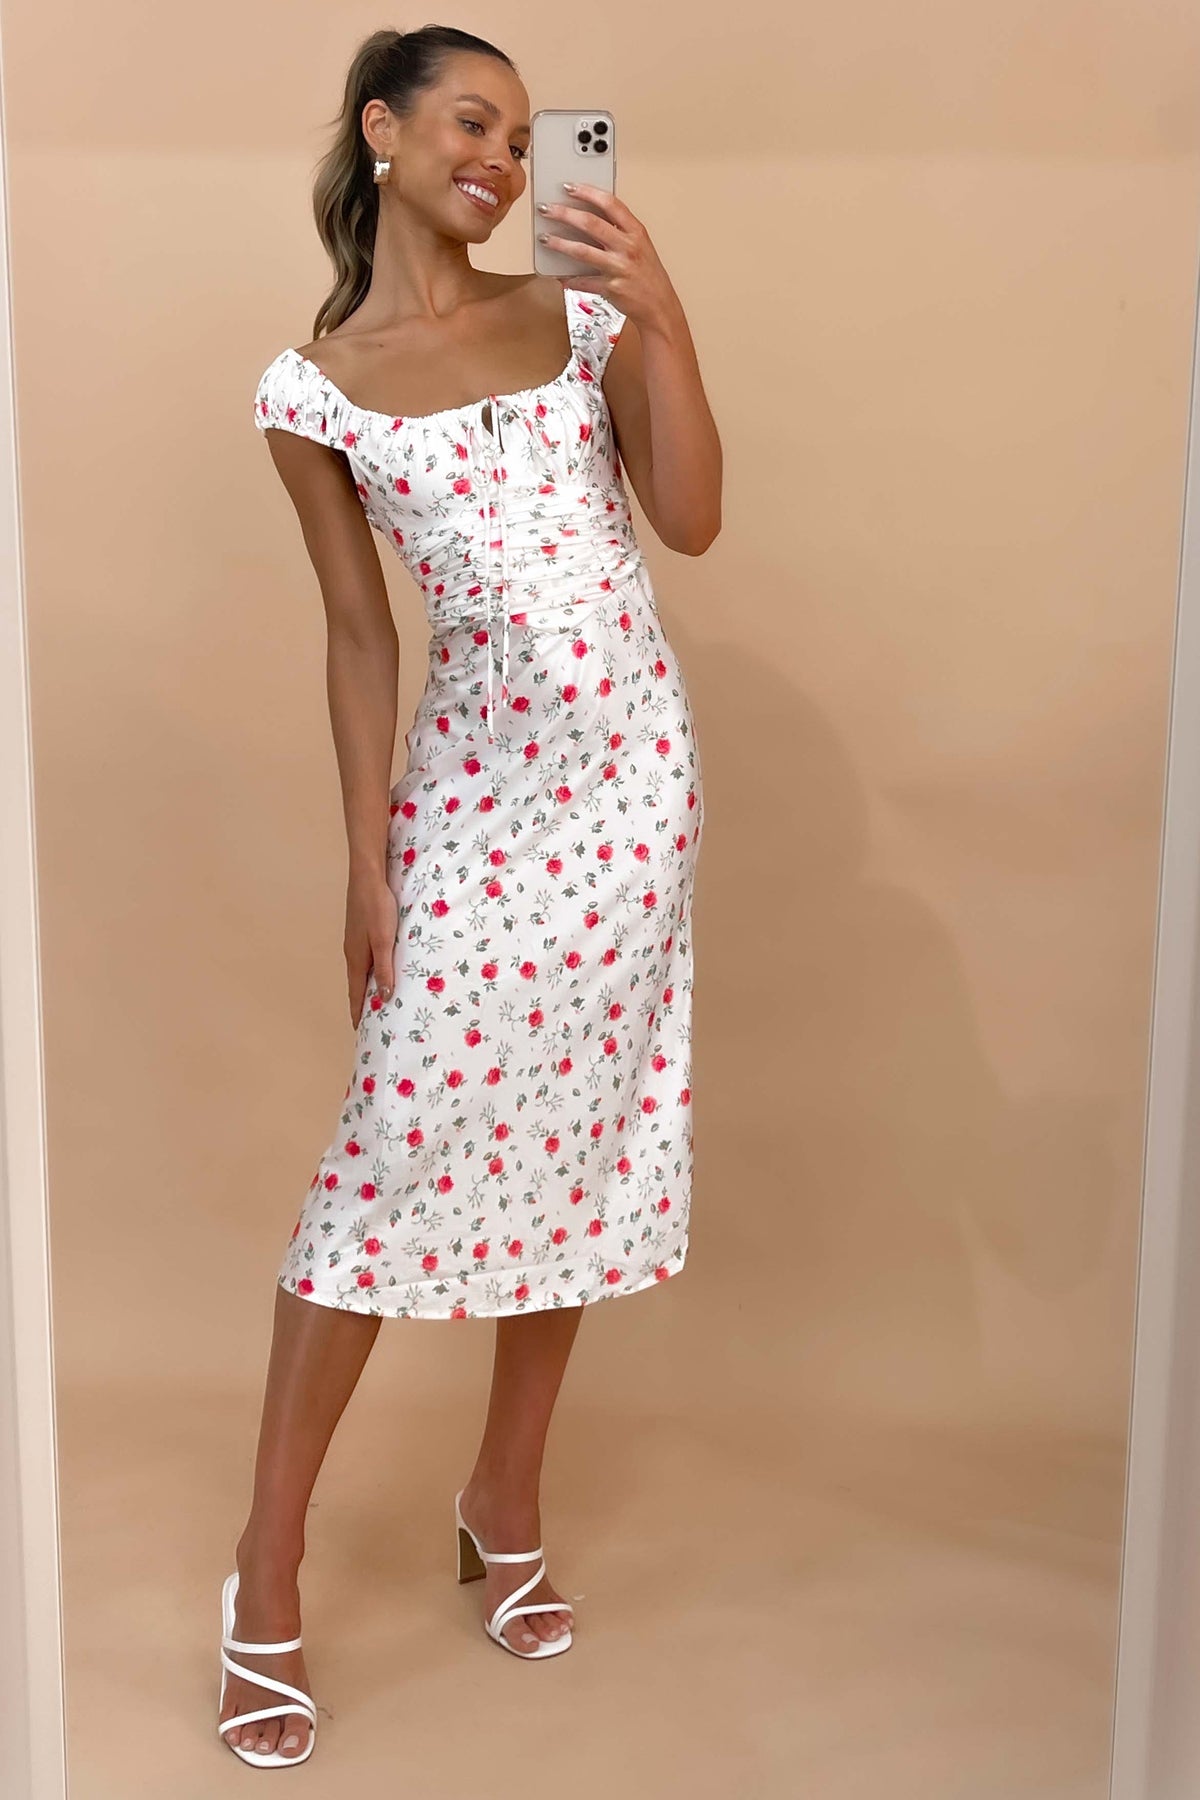 Titian Dress, BODYCON, DRESS, DRESSES, FLORAL, FLORALS, MIDI DRESS, new arrivals, OFF SHOULDER, POLYESTER &amp; RAYON &amp; SPANDEX, POLYESTER AND SPANDEX AND RAYON, WHITE, , -MISHKAH